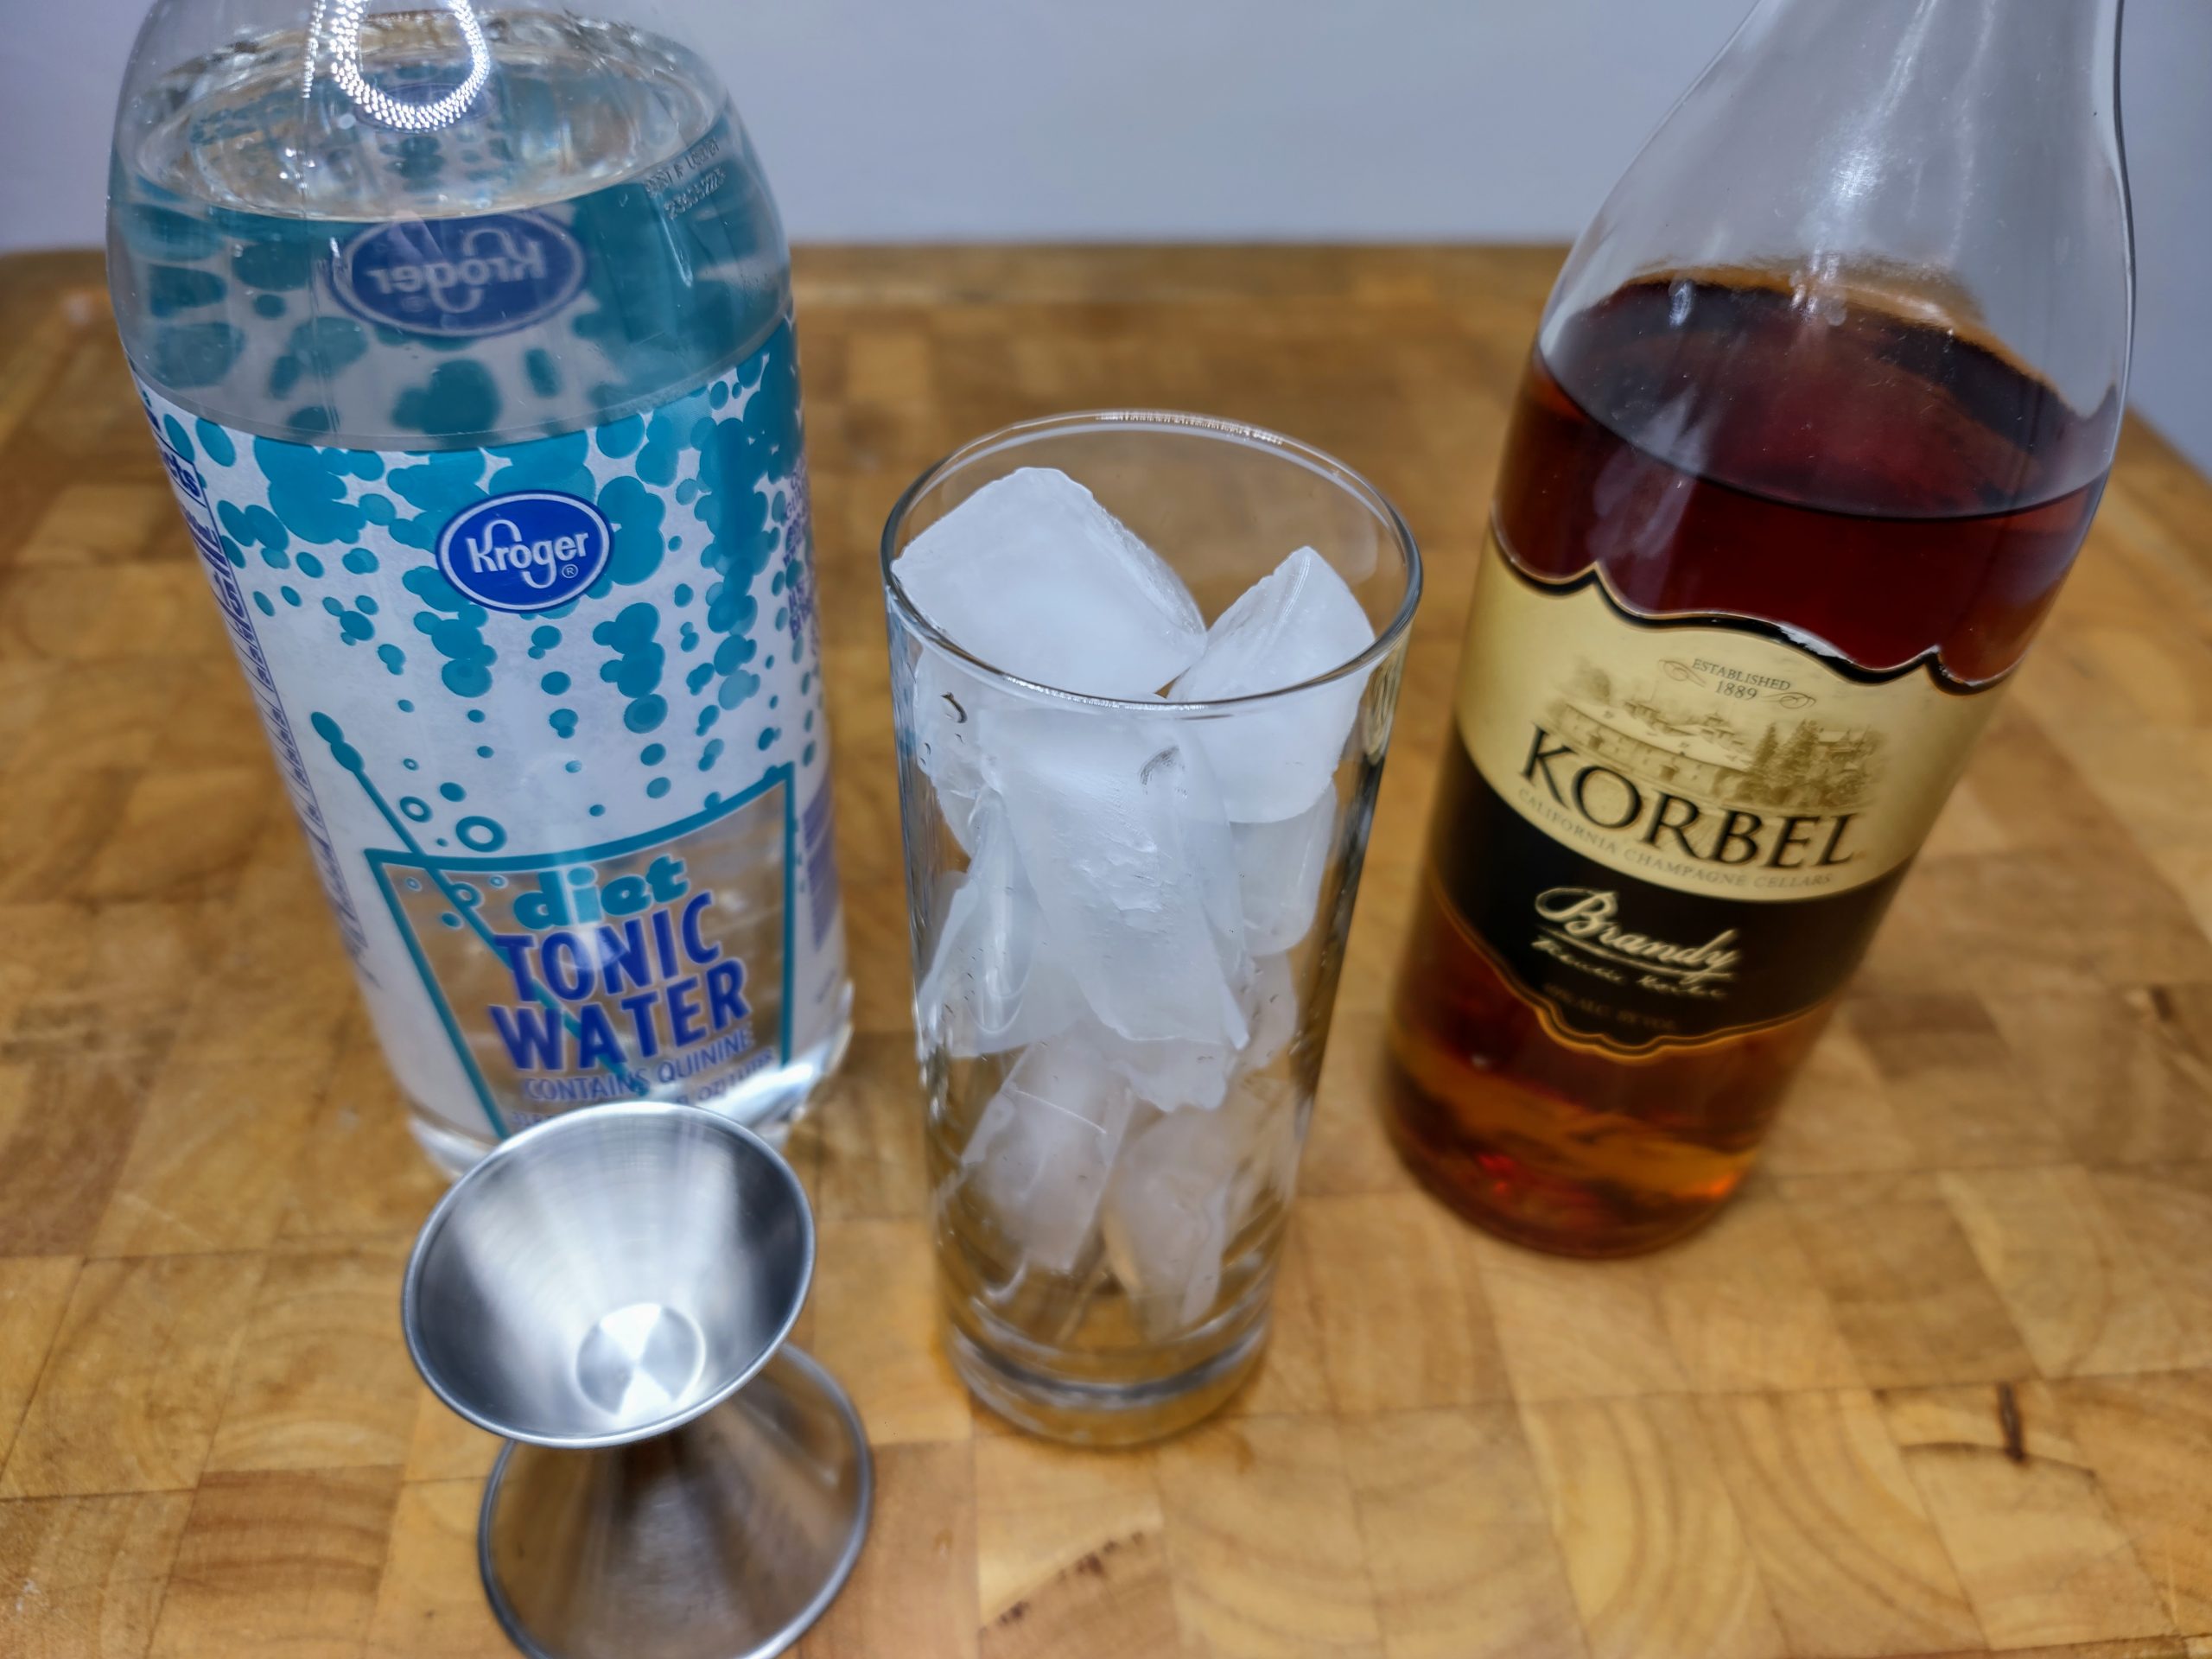 jigger, highball glass filled with ice, bottle of brandy and bottle of tonic water sitting on a wooden table